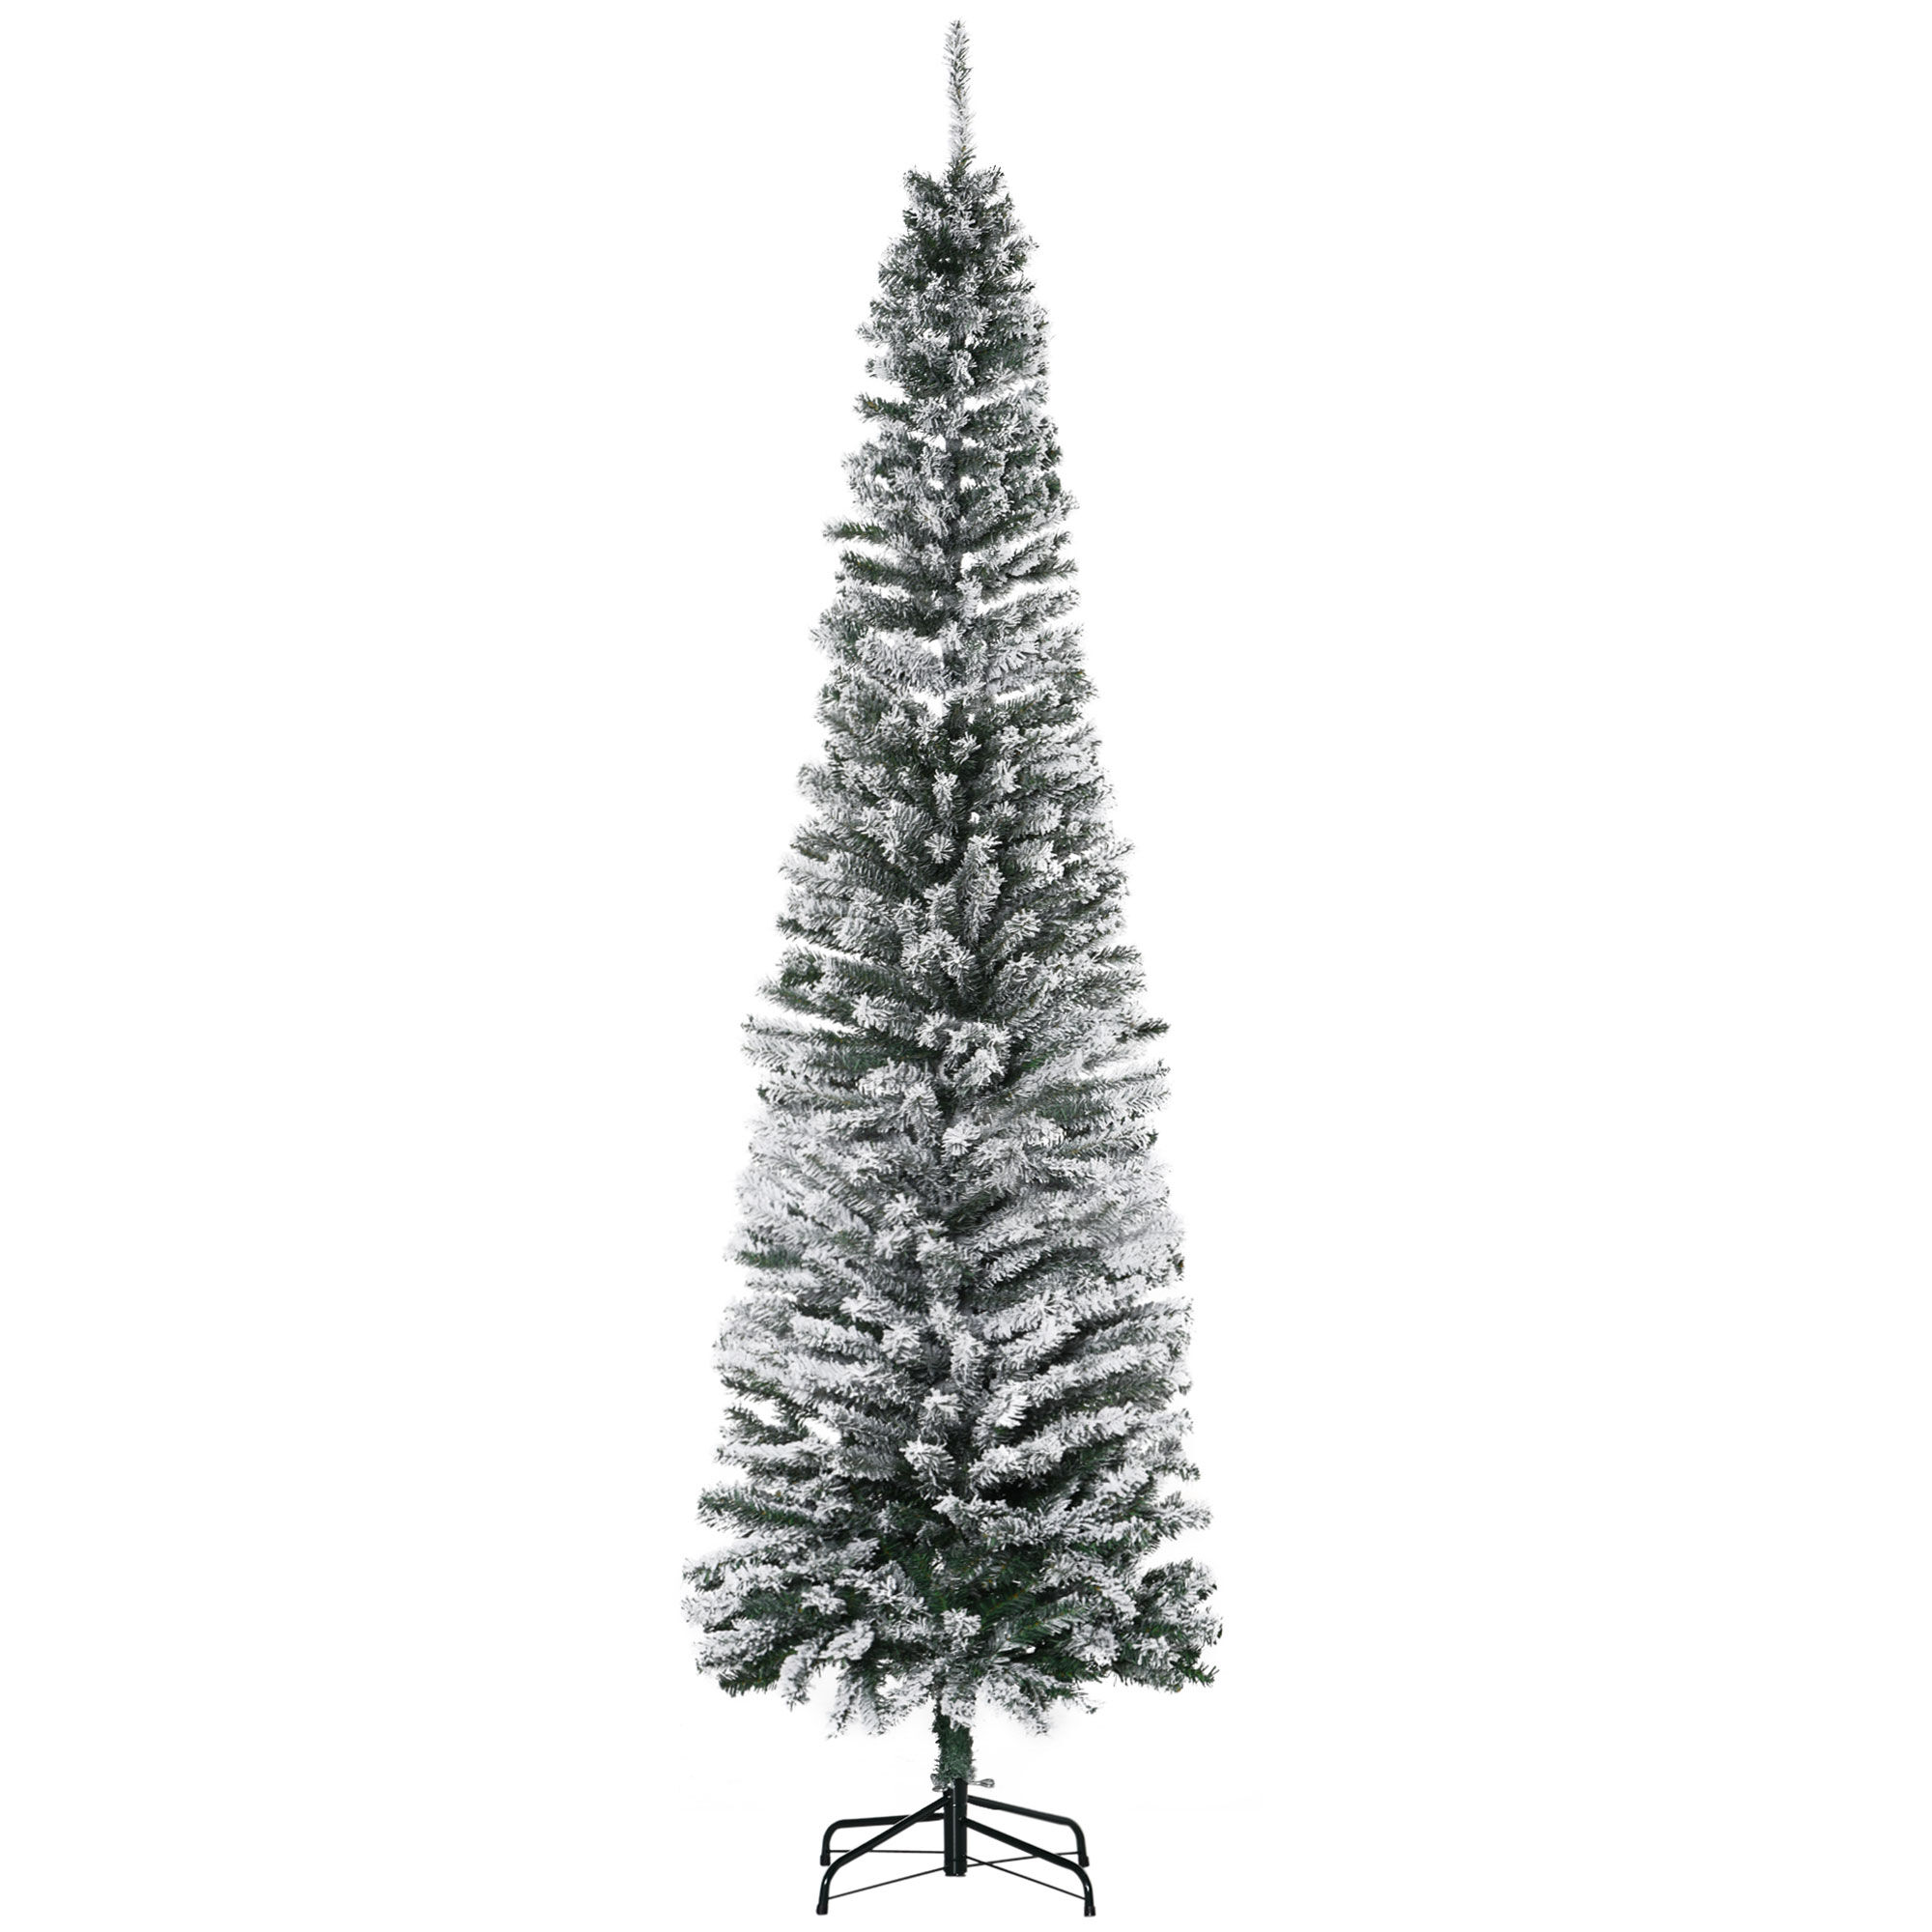 HOMCOM 7.5ft Artificial Snow Flocked Christmas Tree, Winter Style Holiday Xmas Pencil Tree with Foldable Steel Stand Home Indoor Decoration, Green